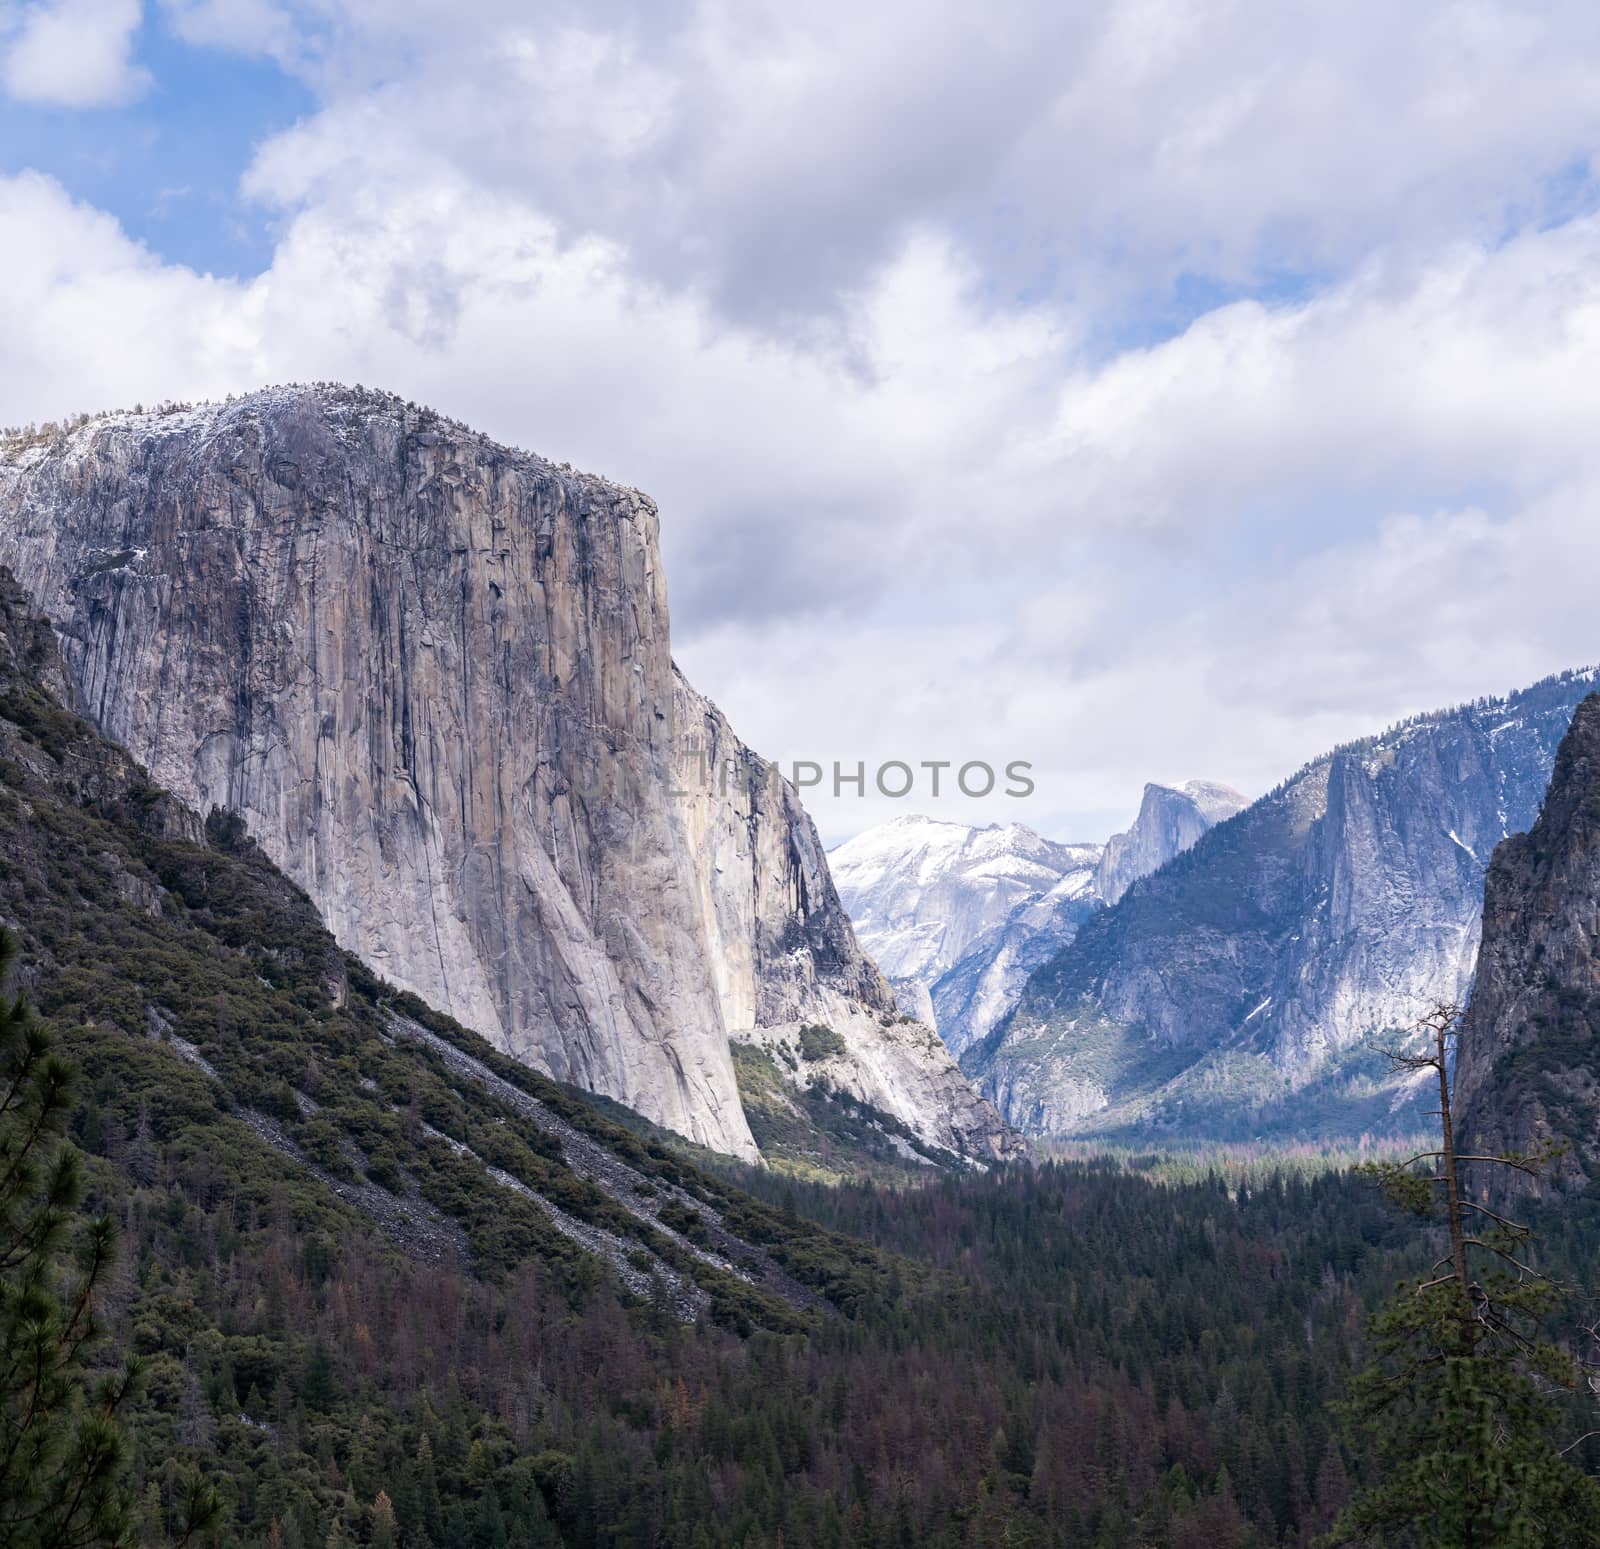 Tunnel View of Yosemite national Park in California San Francisco USA